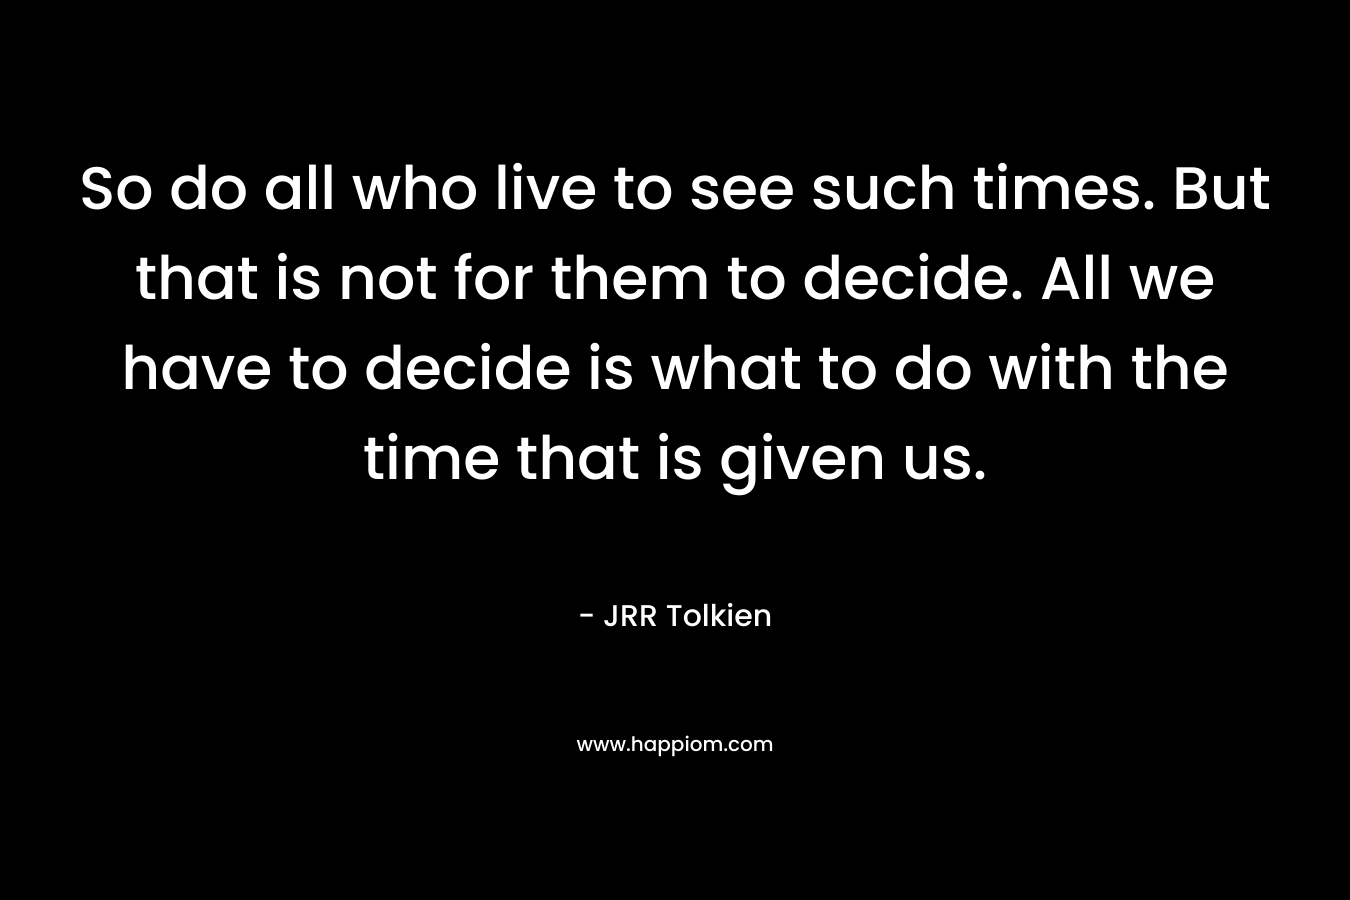 So do all who live to see such times. But that is not for them to decide. All we have to decide is what to do with the time that is given us.